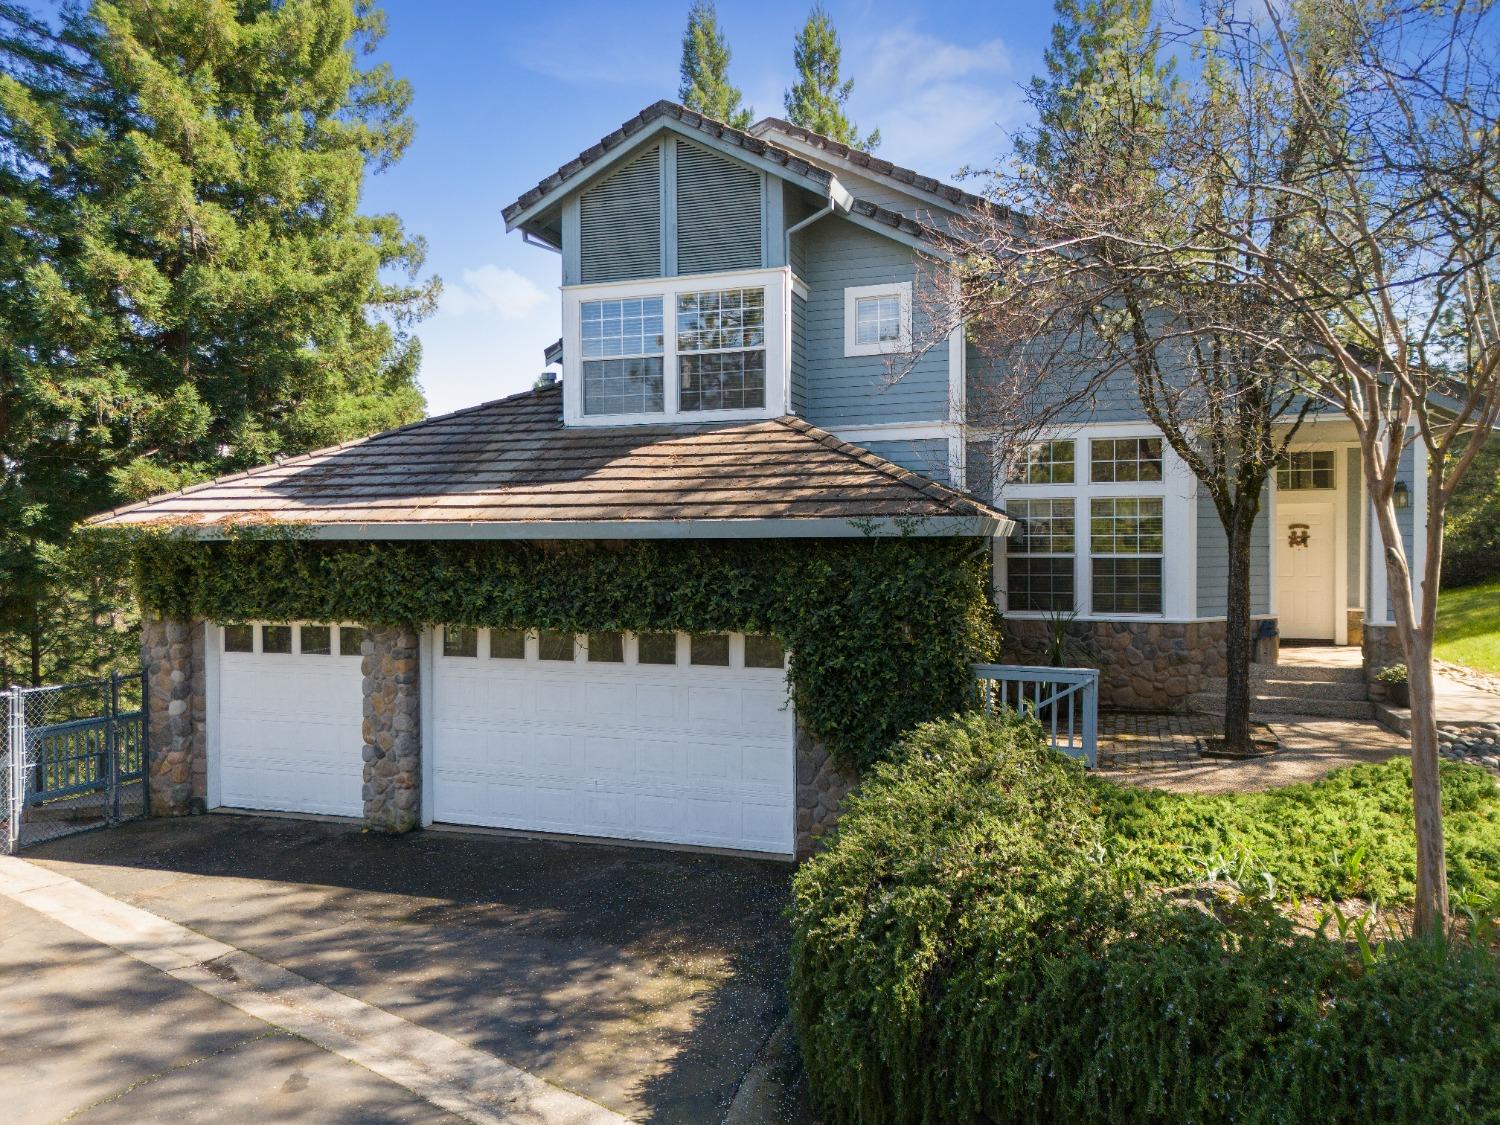 Photo of 1235 Naturewood Dr in Meadow Vista, CA